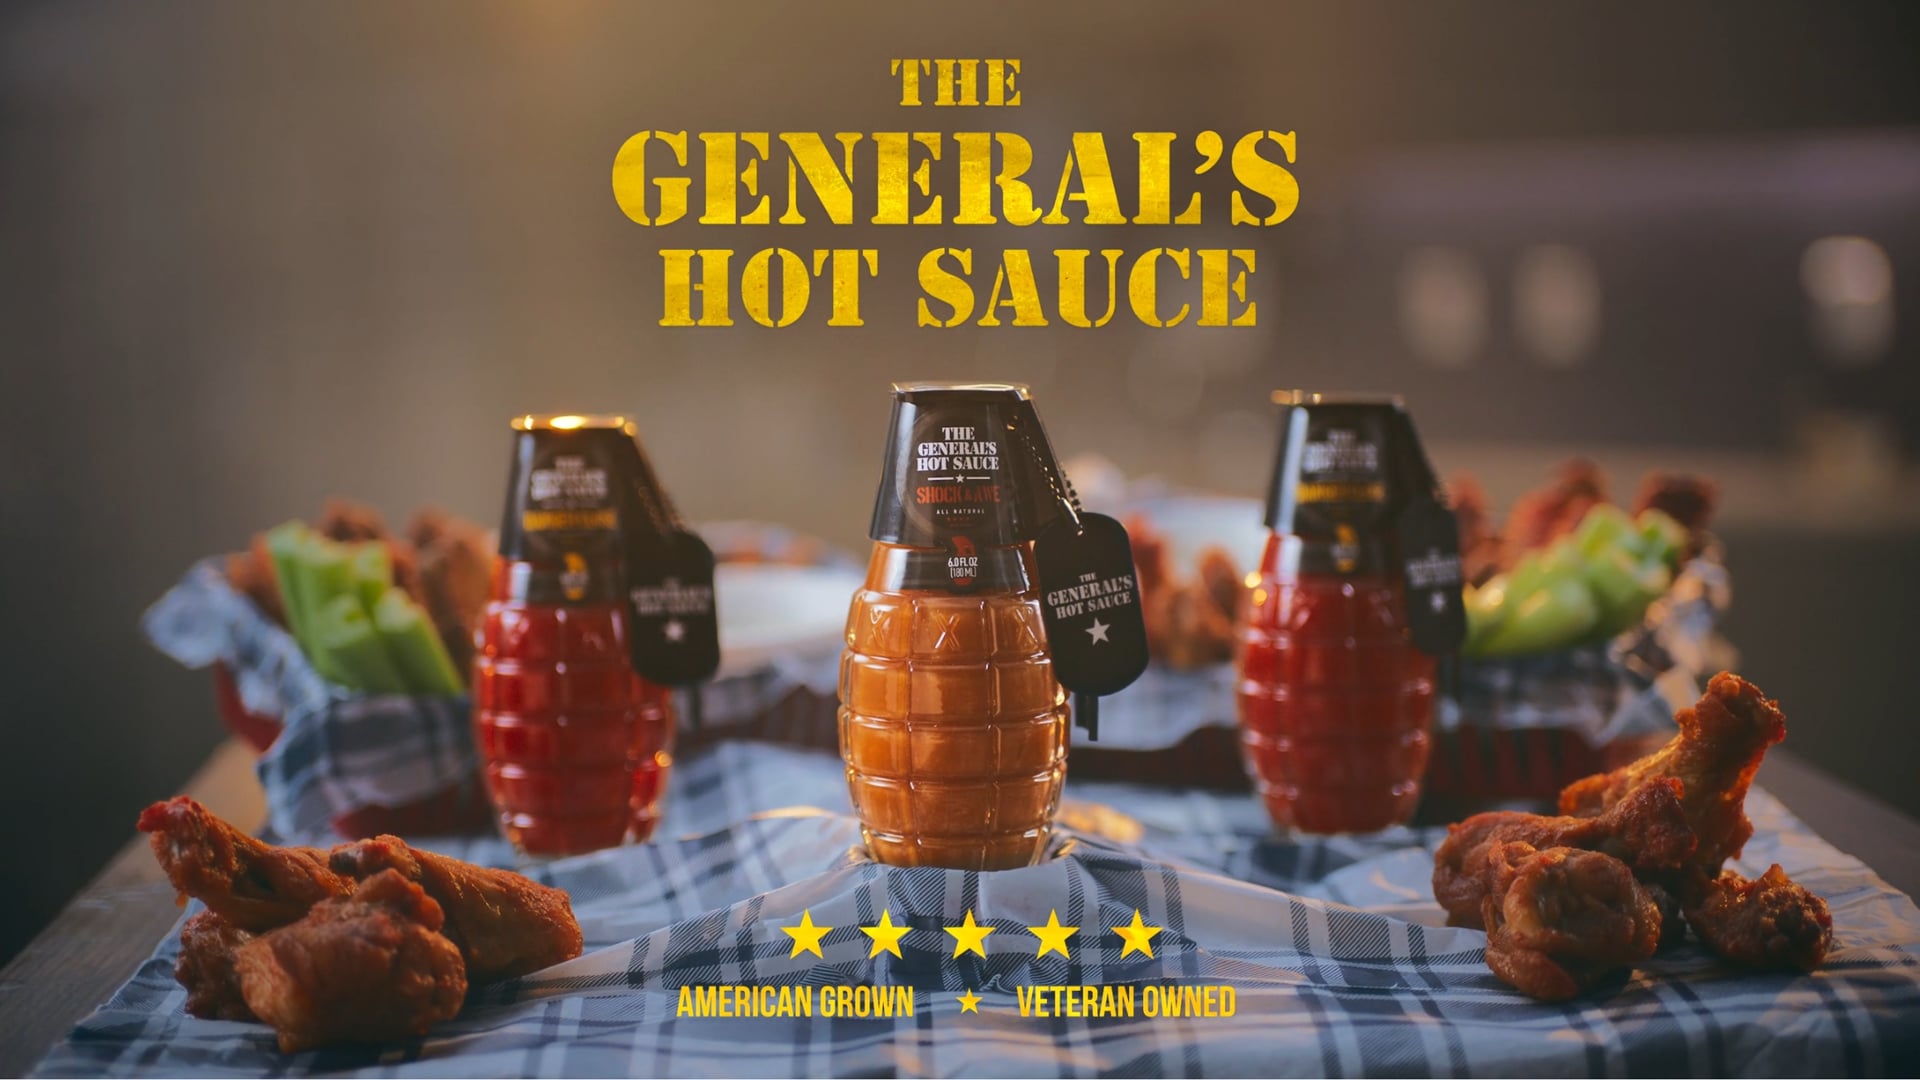 The General's Hot Sauce